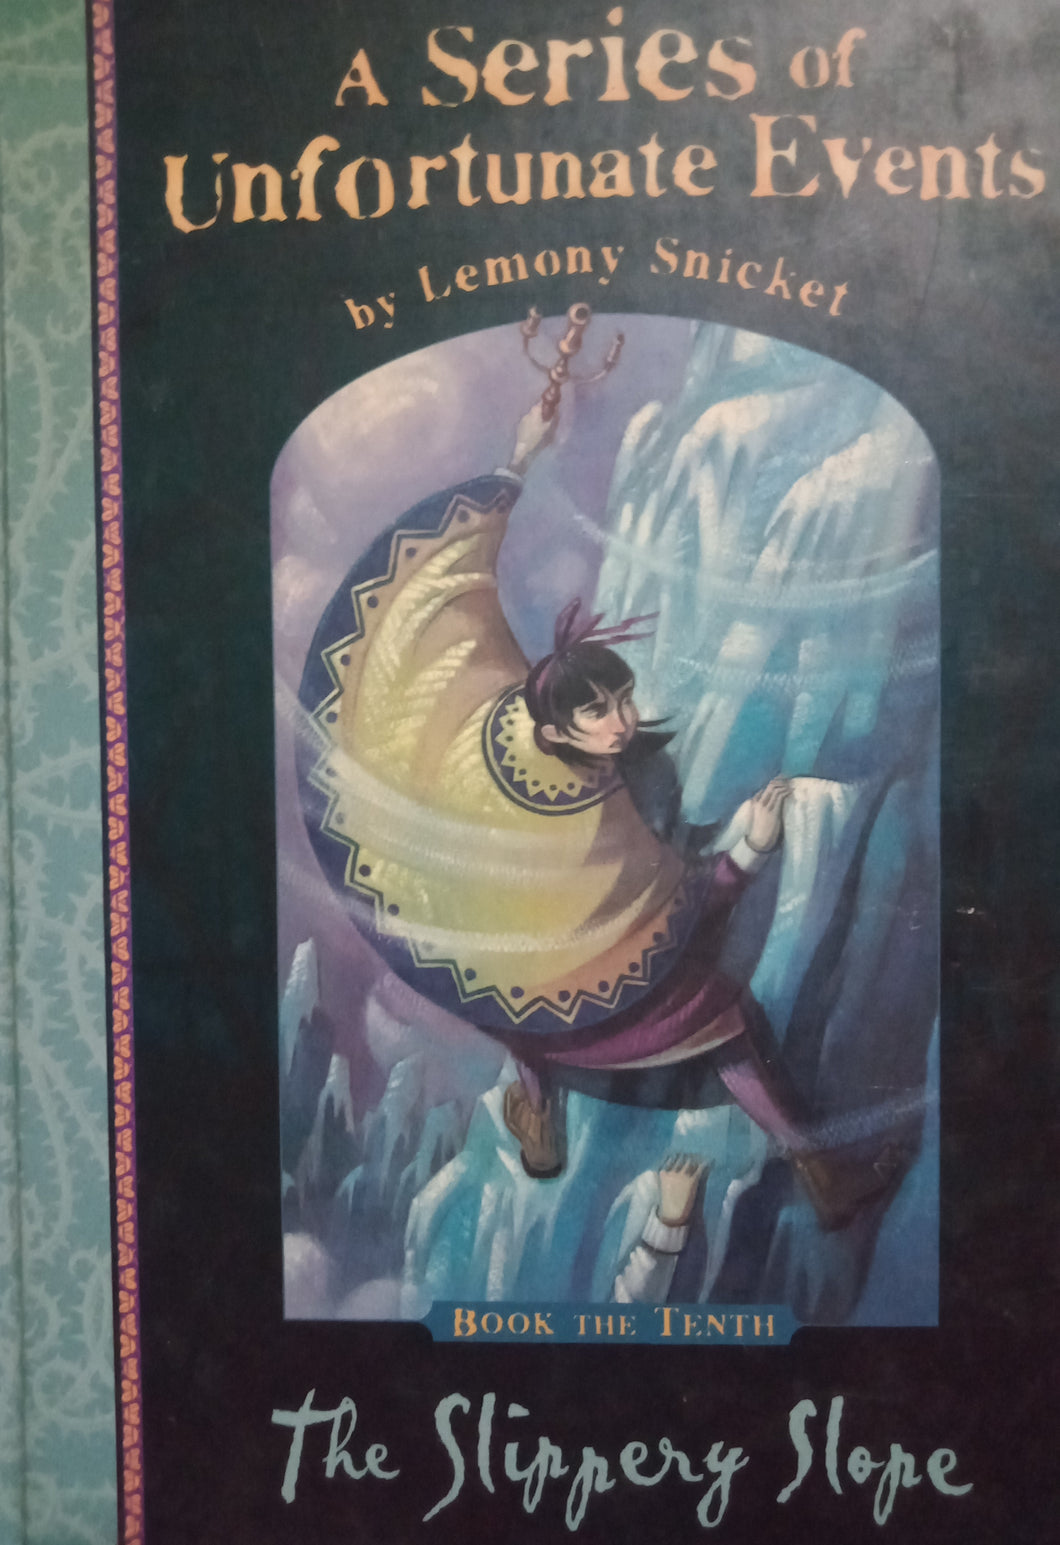 A Series of Unfortunate Events The Slippery slope By Lemony Snicket